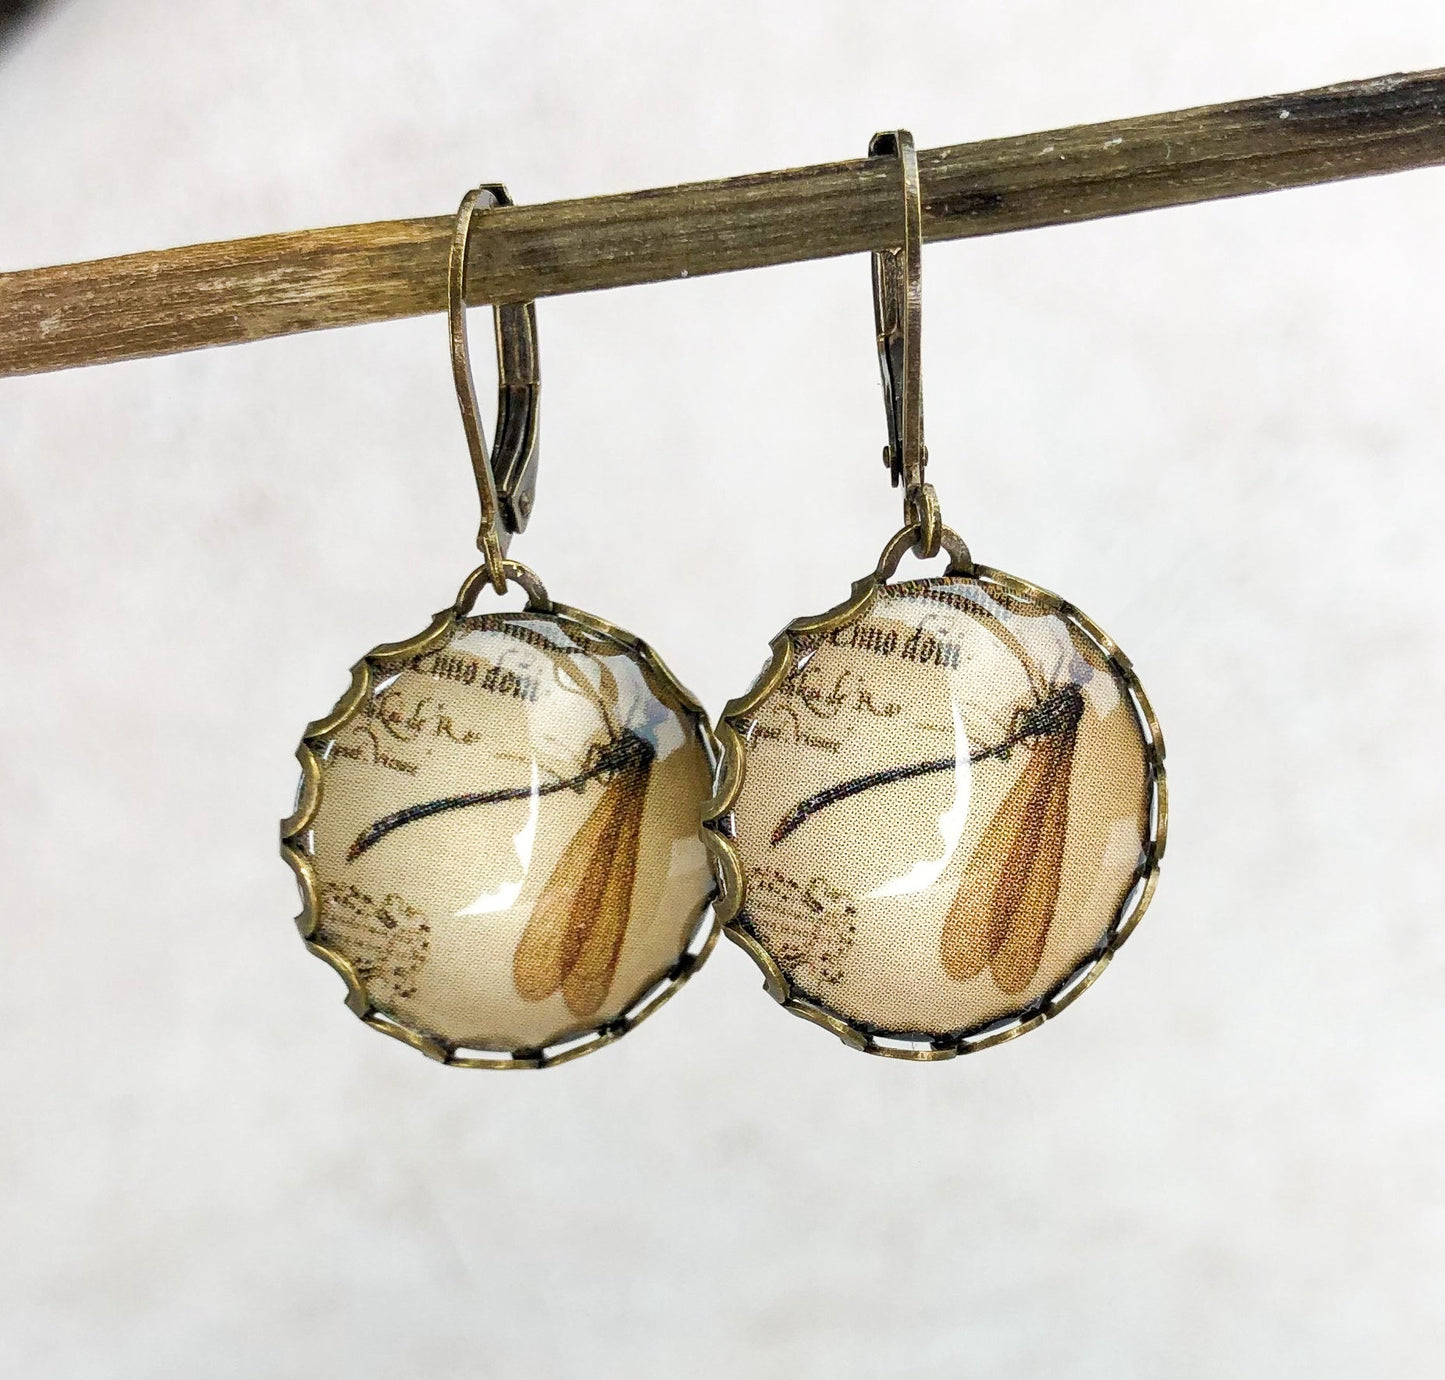 Natural researcher earrings in vintage style